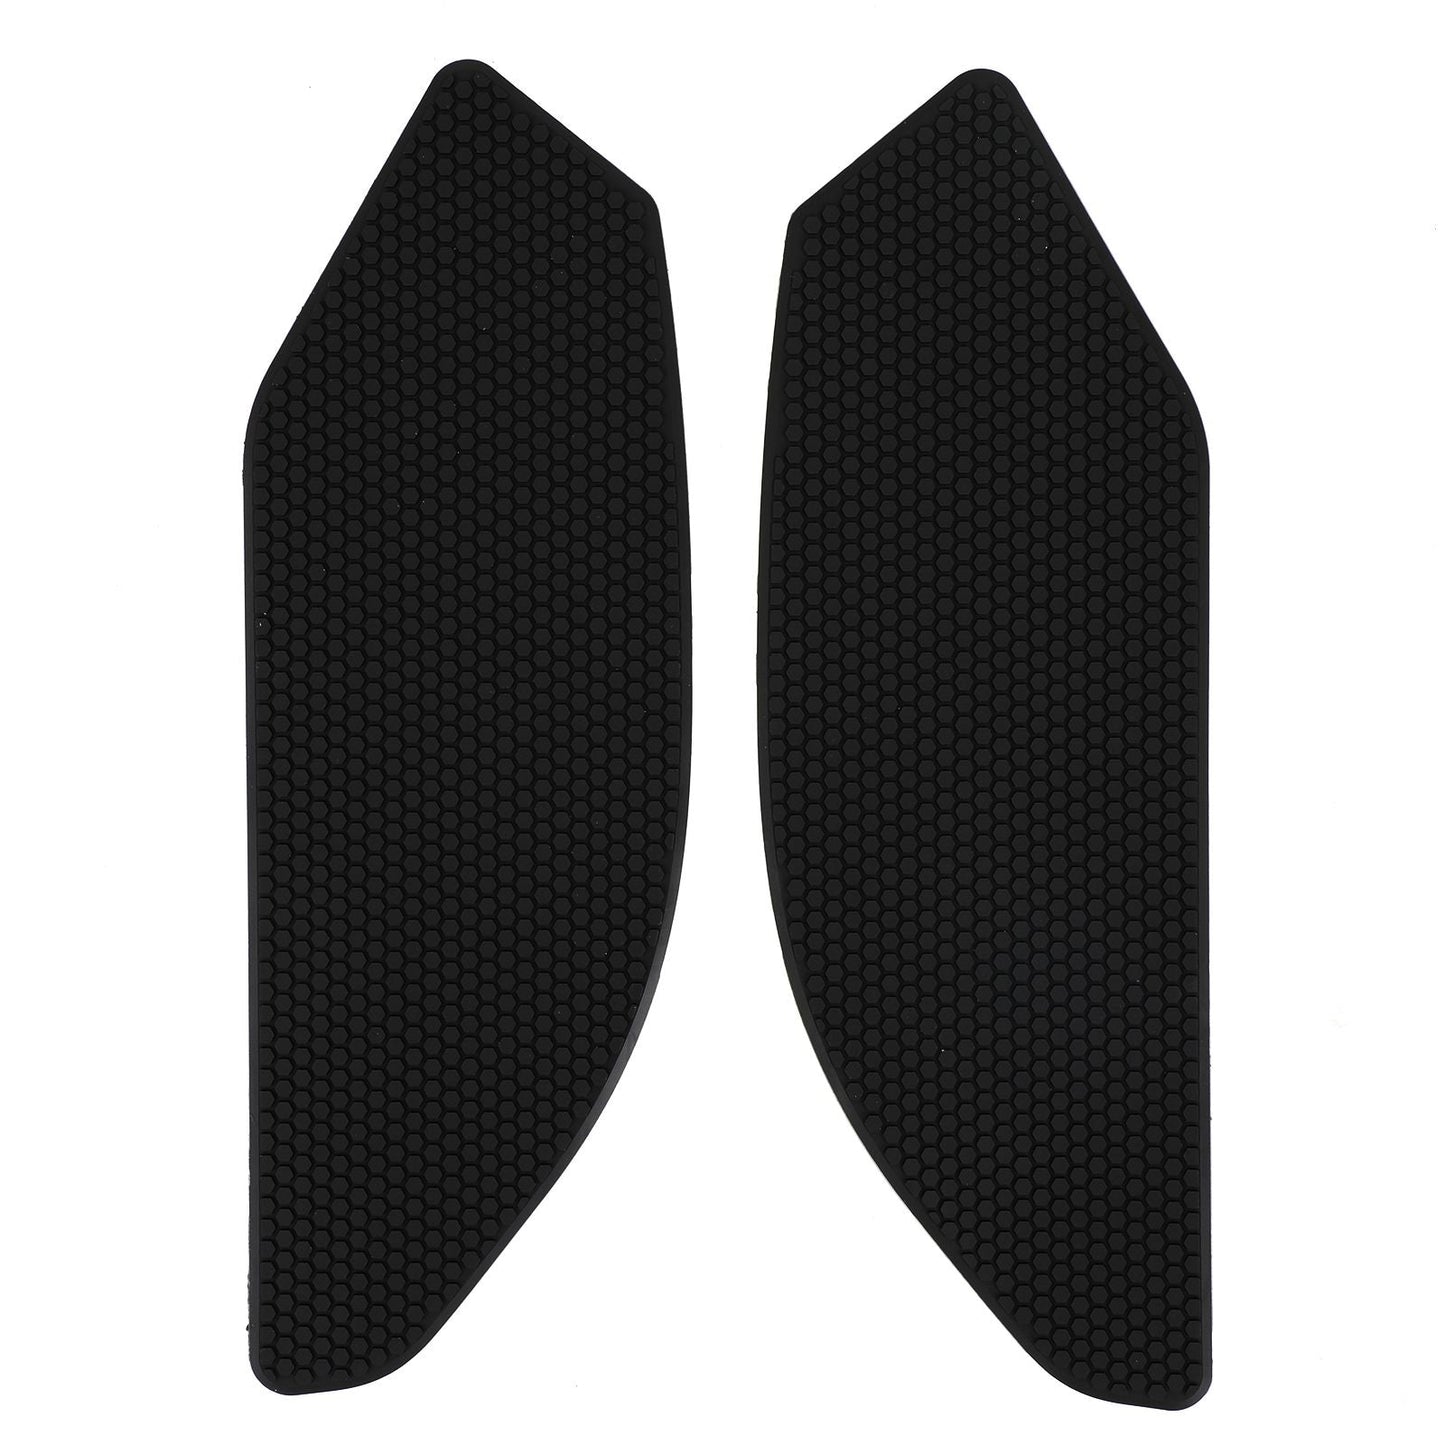 2x Side Tank Traction Grips Pads Fit for Suzuki GSXS1000 GSXS1000F 2014-2019